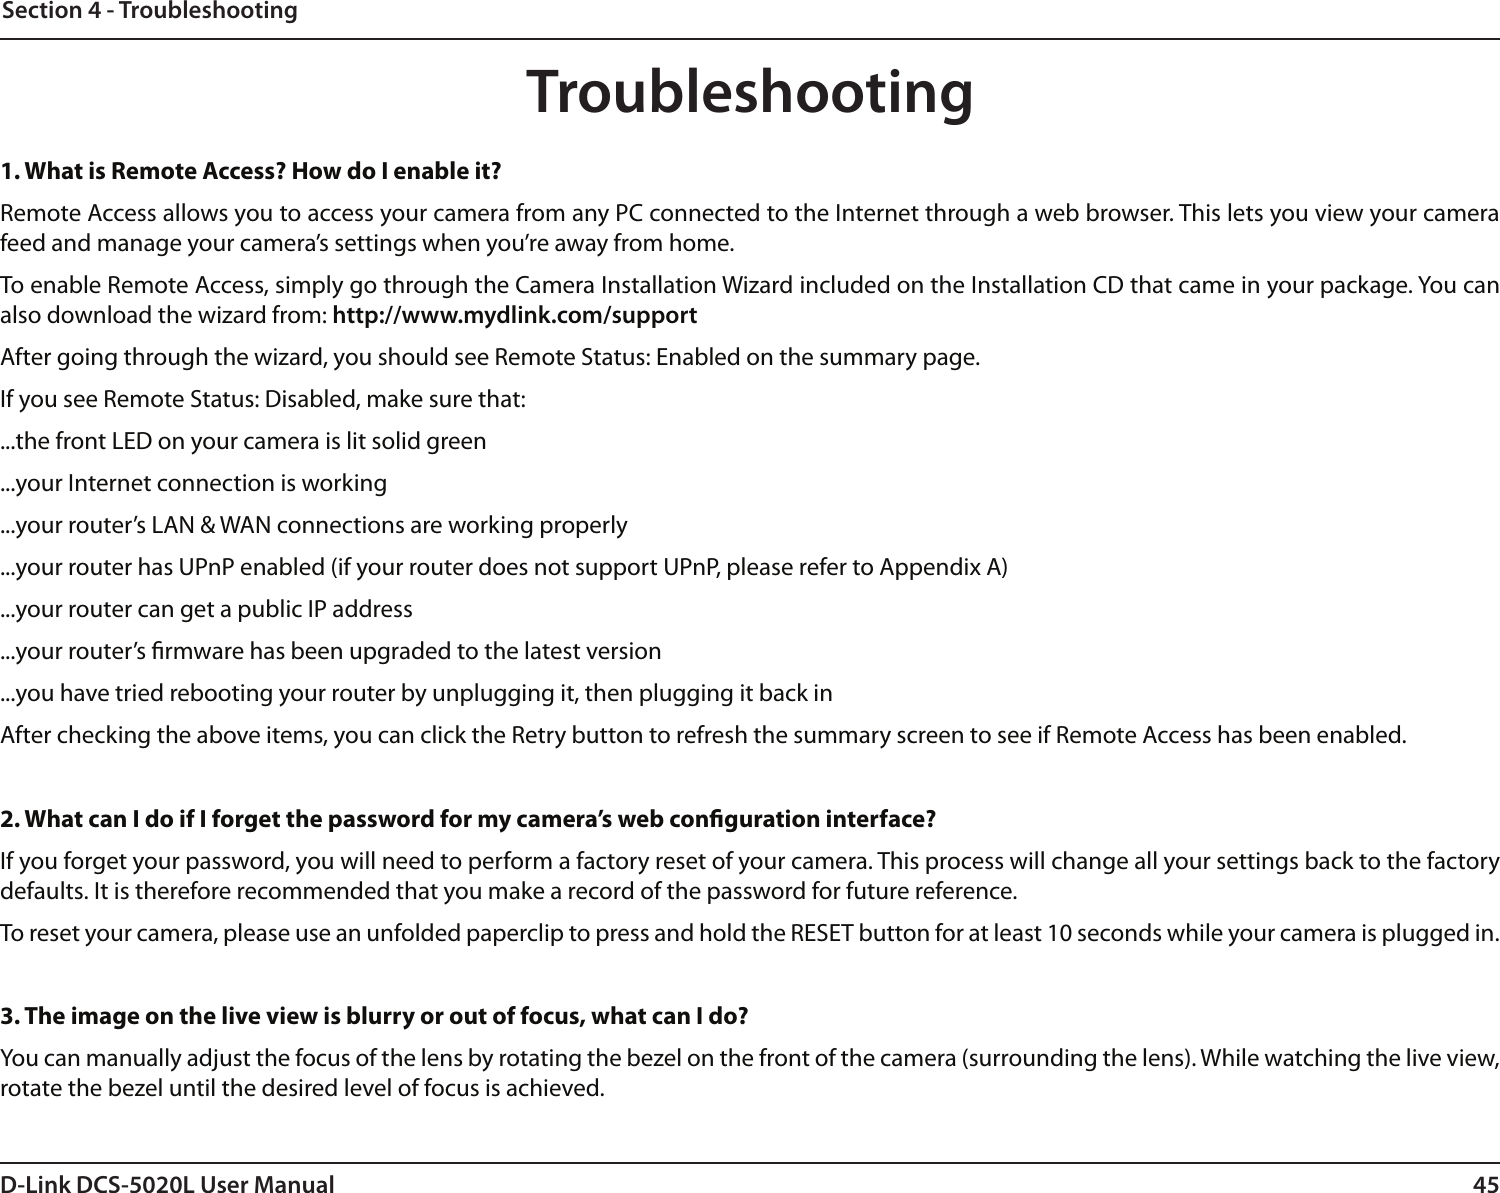 45D-Link DCS-5020L User ManualSection 4 - TroubleshootingTroubleshooting1. What is Remote Access? How do I enable it?Remote Access allows you to access your camera from any PC connected to the Internet through a web browser. This lets you view your camera feed and manage your camera’s settings when you’re away from home. To enable Remote Access, simply go through the Camera Installation Wizard included on the Installation CD that came in your package. You can also download the wizard from: http://www.mydlink.com/supportAfter going through the wizard, you should see Remote Status: Enabled on the summary page.If you see Remote Status: Disabled, make sure that:...the front LED on your camera is lit solid green...your Internet connection is working...your router’s LAN &amp; WAN connections are working properly...your router has UPnP enabled (if your router does not support UPnP, please refer to Appendix A)...your router can get a public IP address...your router’s rmware has been upgraded to the latest version...you have tried rebooting your router by unplugging it, then plugging it back inAfter checking the above items, you can click the Retry button to refresh the summary screen to see if Remote Access has been enabled.2. What can I do if I forget the password for my camera’s web conguration interface?If you forget your password, you will need to perform a factory reset of your camera. This process will change all your settings back to the factory defaults. It is therefore recommended that you make a record of the password for future reference. To reset your camera, please use an unfolded paperclip to press and hold the RESET button for at least 10 seconds while your camera is plugged in.3. The image on the live view is blurry or out of focus, what can I do?You can manually adjust the focus of the lens by rotating the bezel on the front of the camera (surrounding the lens). While watching the live view, rotate the bezel until the desired level of focus is achieved.